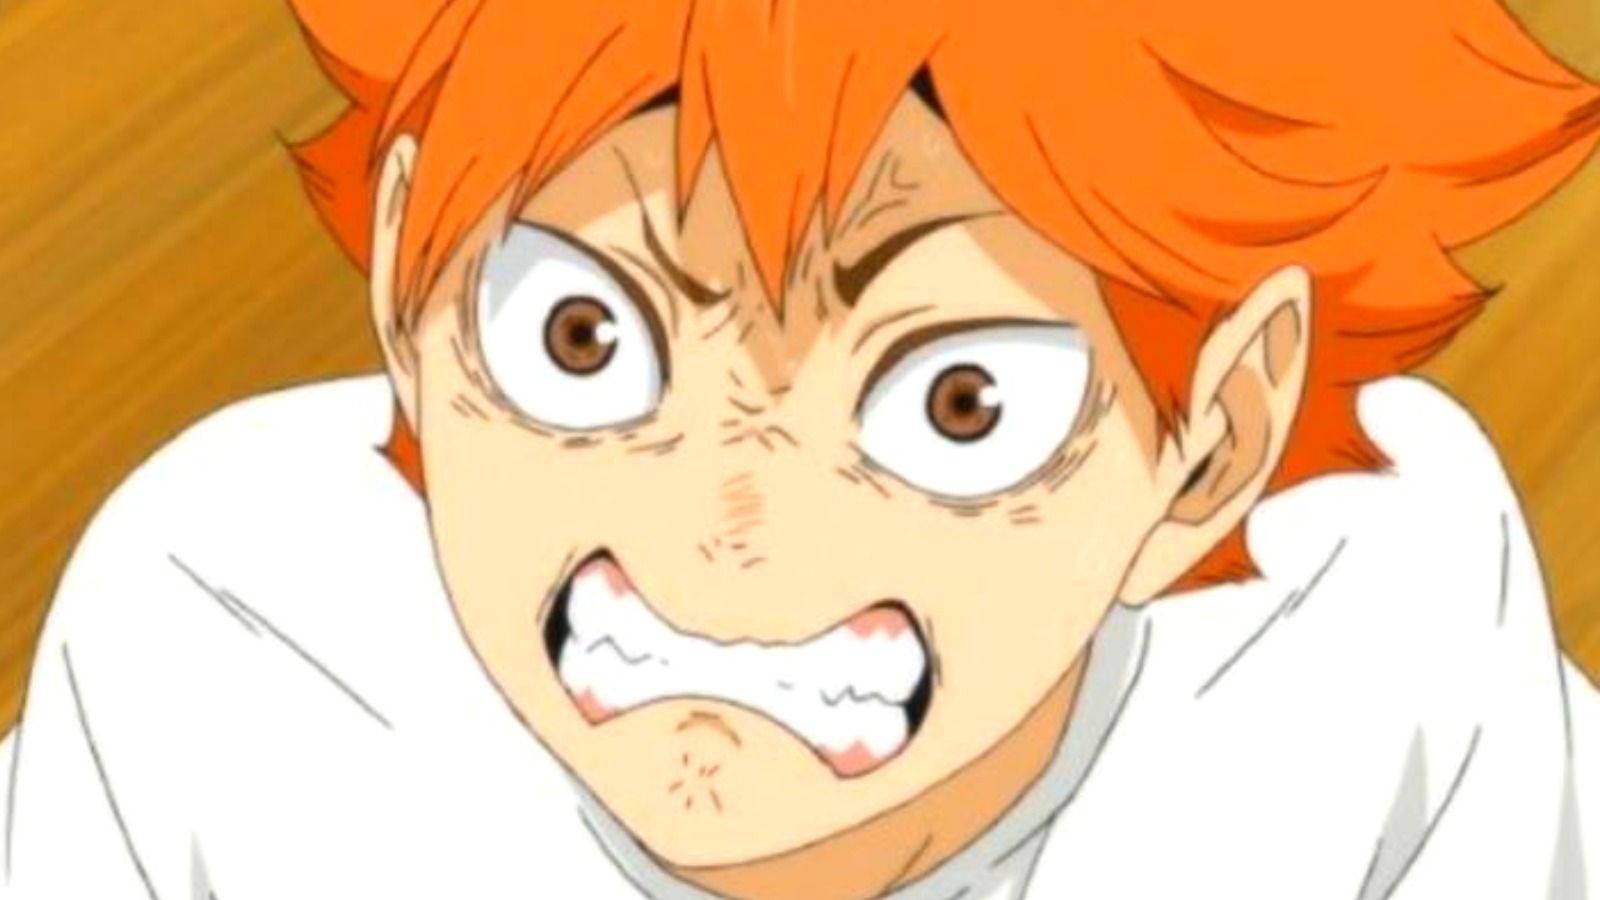 The Real Reason The Haikyuu Characters Look So Scary Sometimes